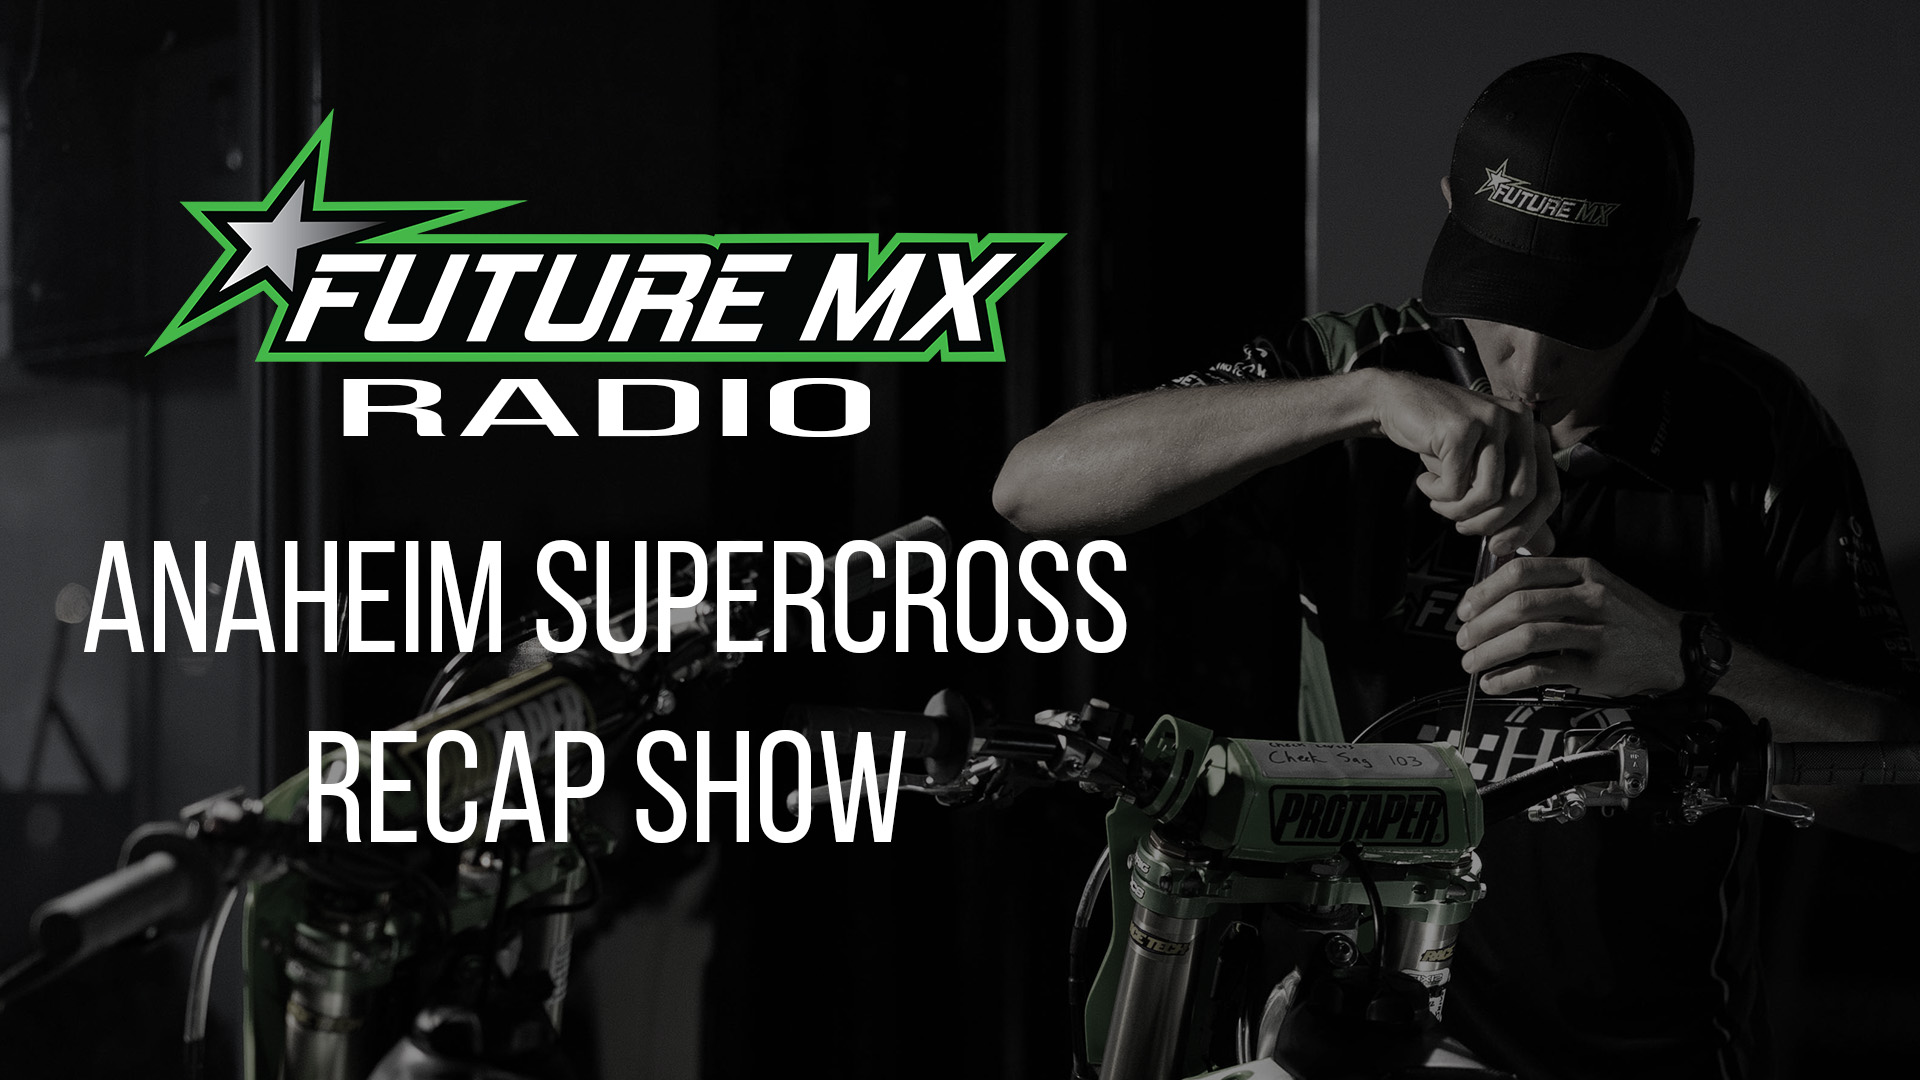 Future Motocross Radio | Episode 37: Anaheim 1 Supercross Post Race Show Discussion with Dave Dukey and Peter Parenti